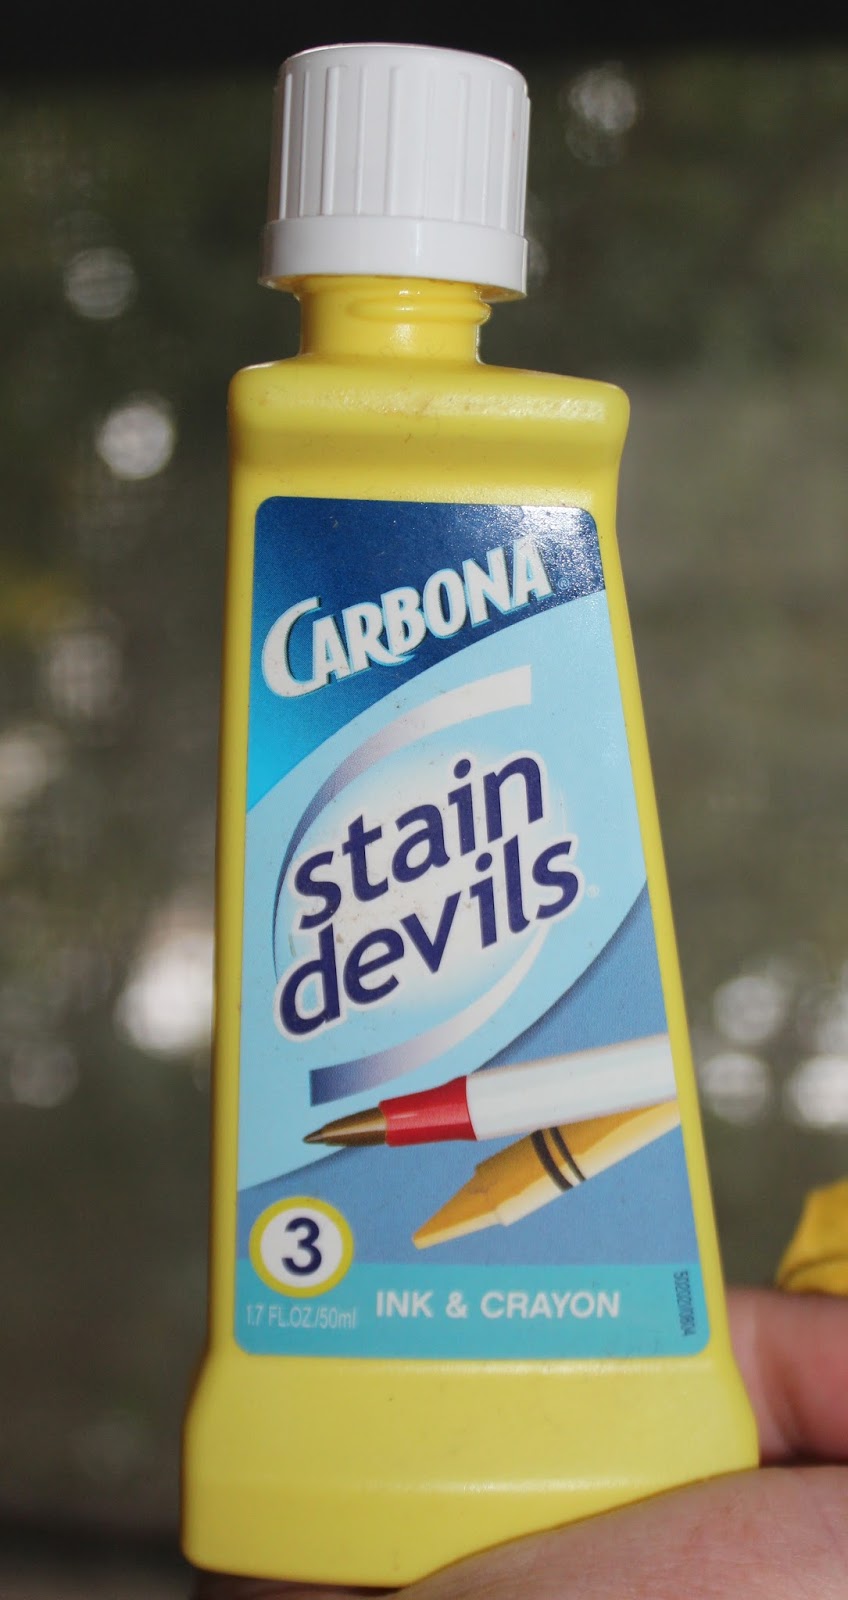 Ultimate Guide To Carbona Stain Remover Products {Stain Devils & More}